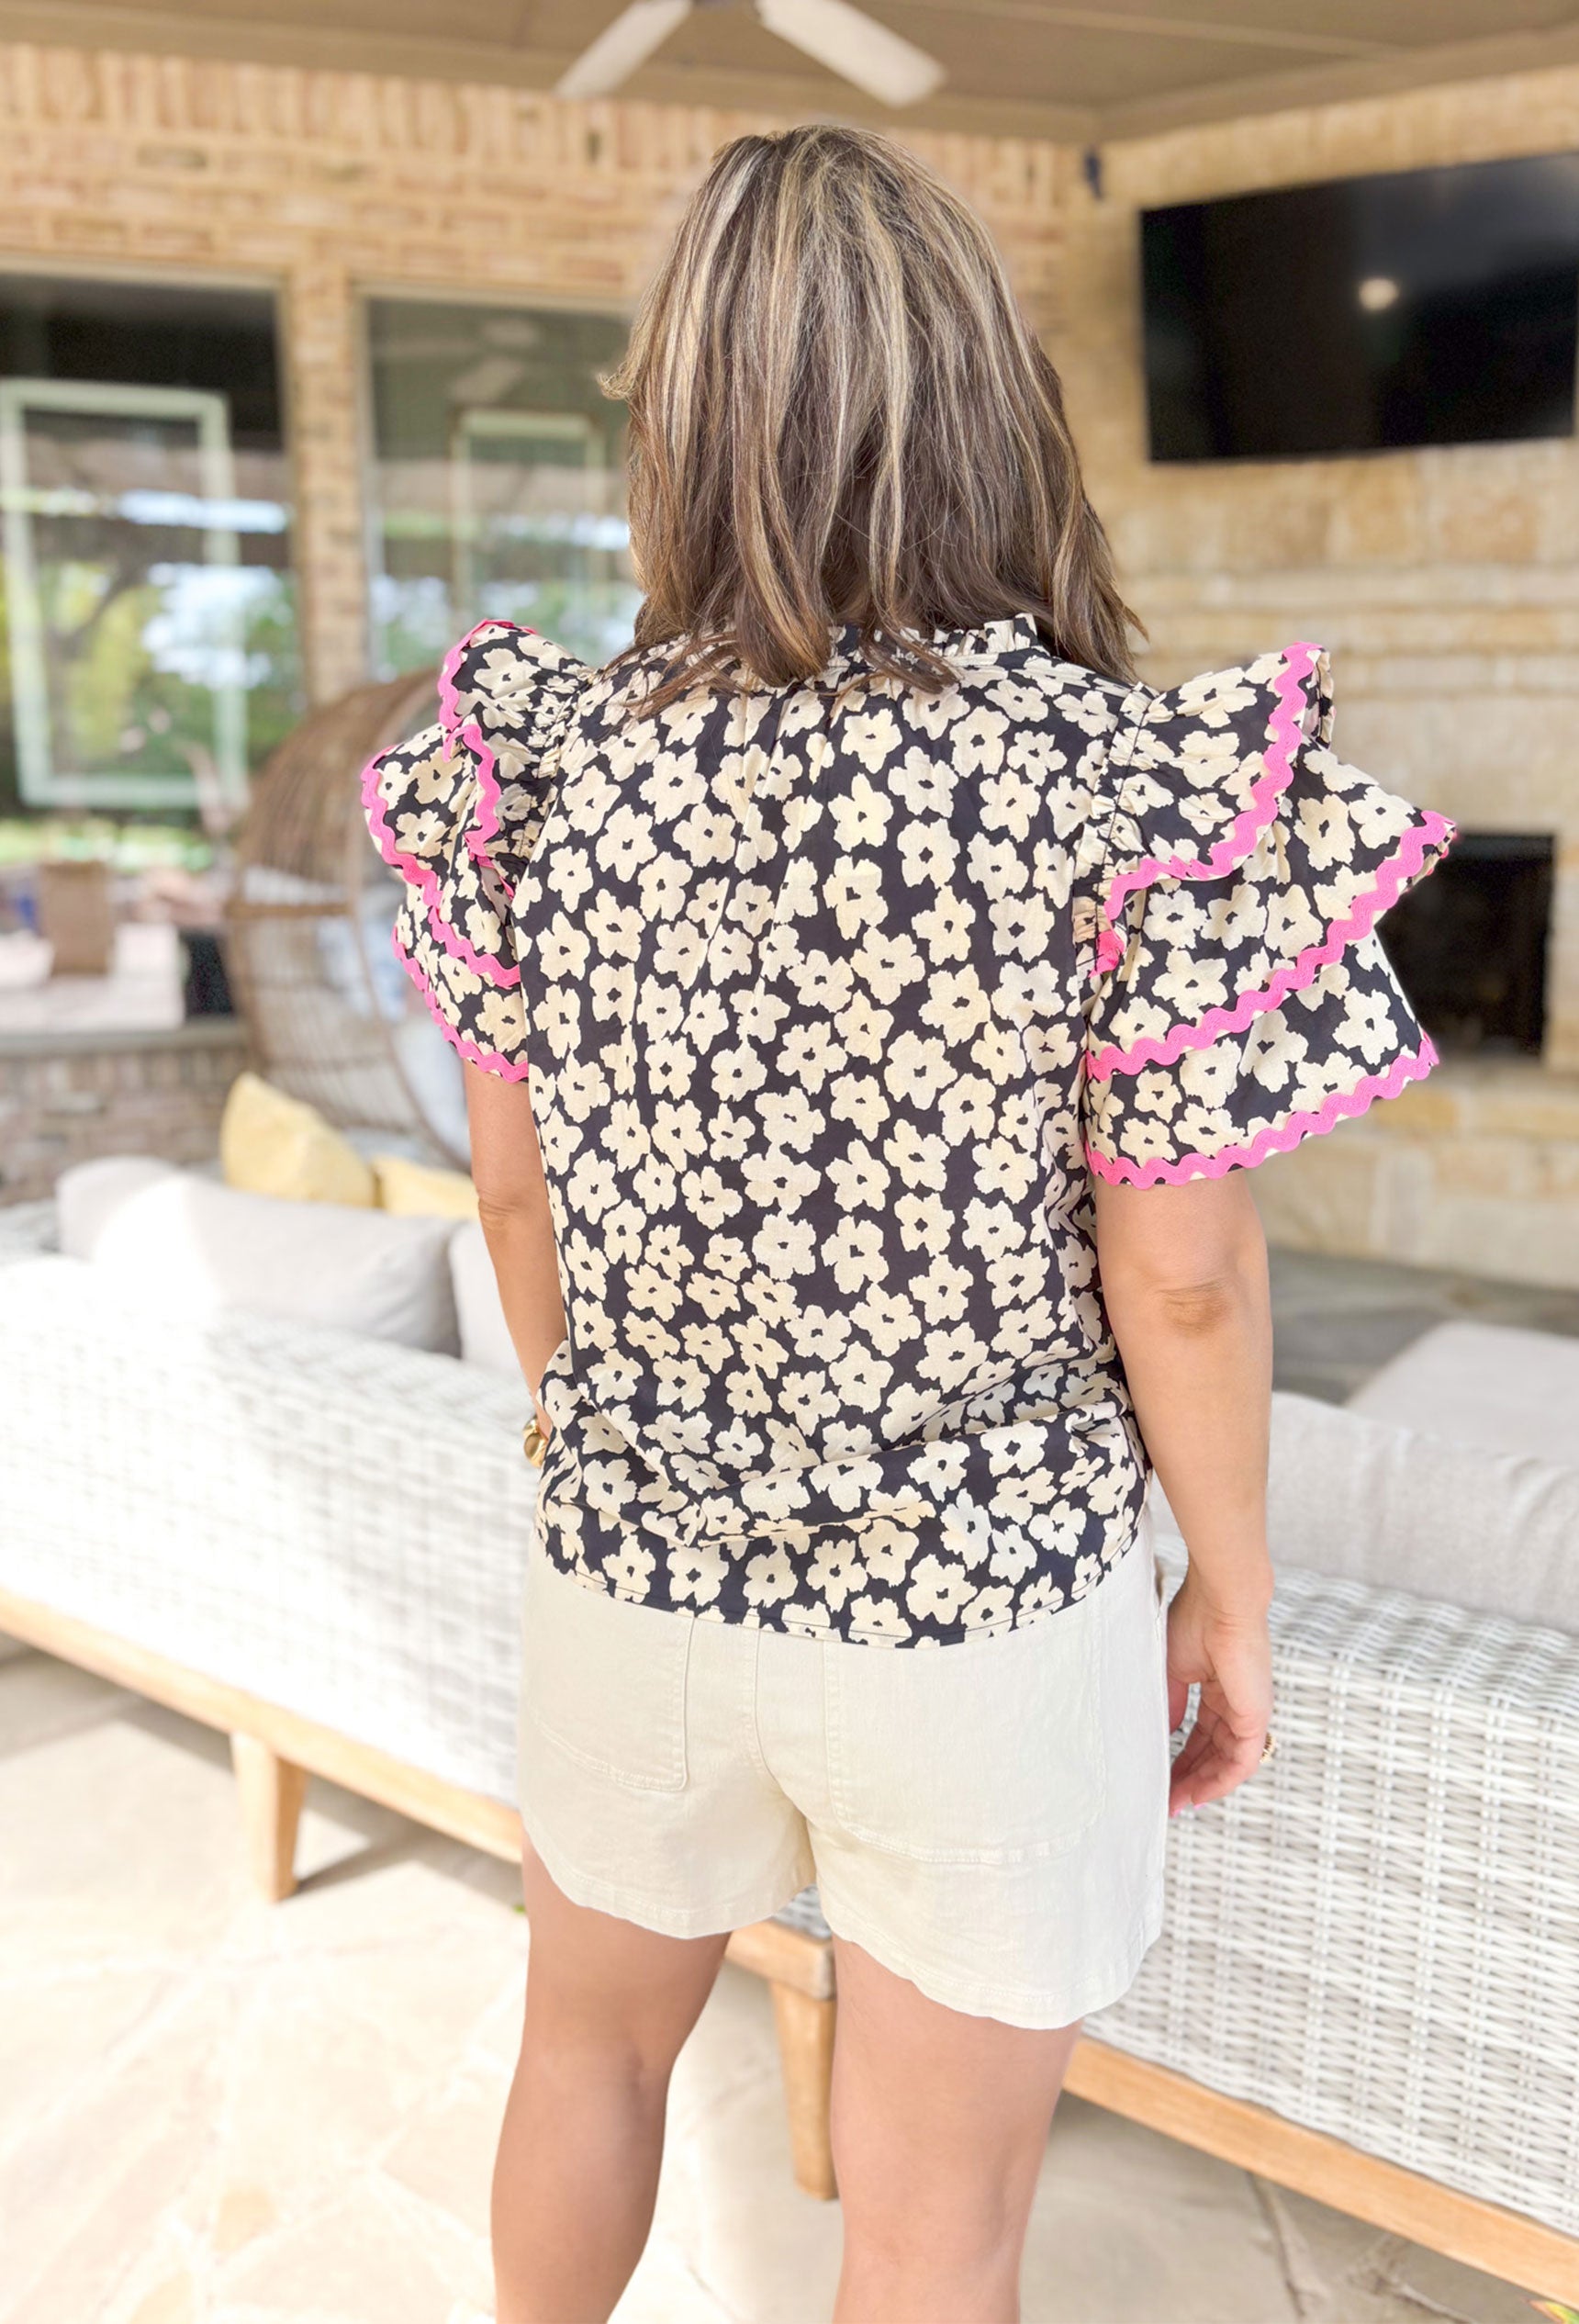 Natural Beauty Floral Blouse, black and cream floral blouse with pink rik-rak details on the ruffle sleeves